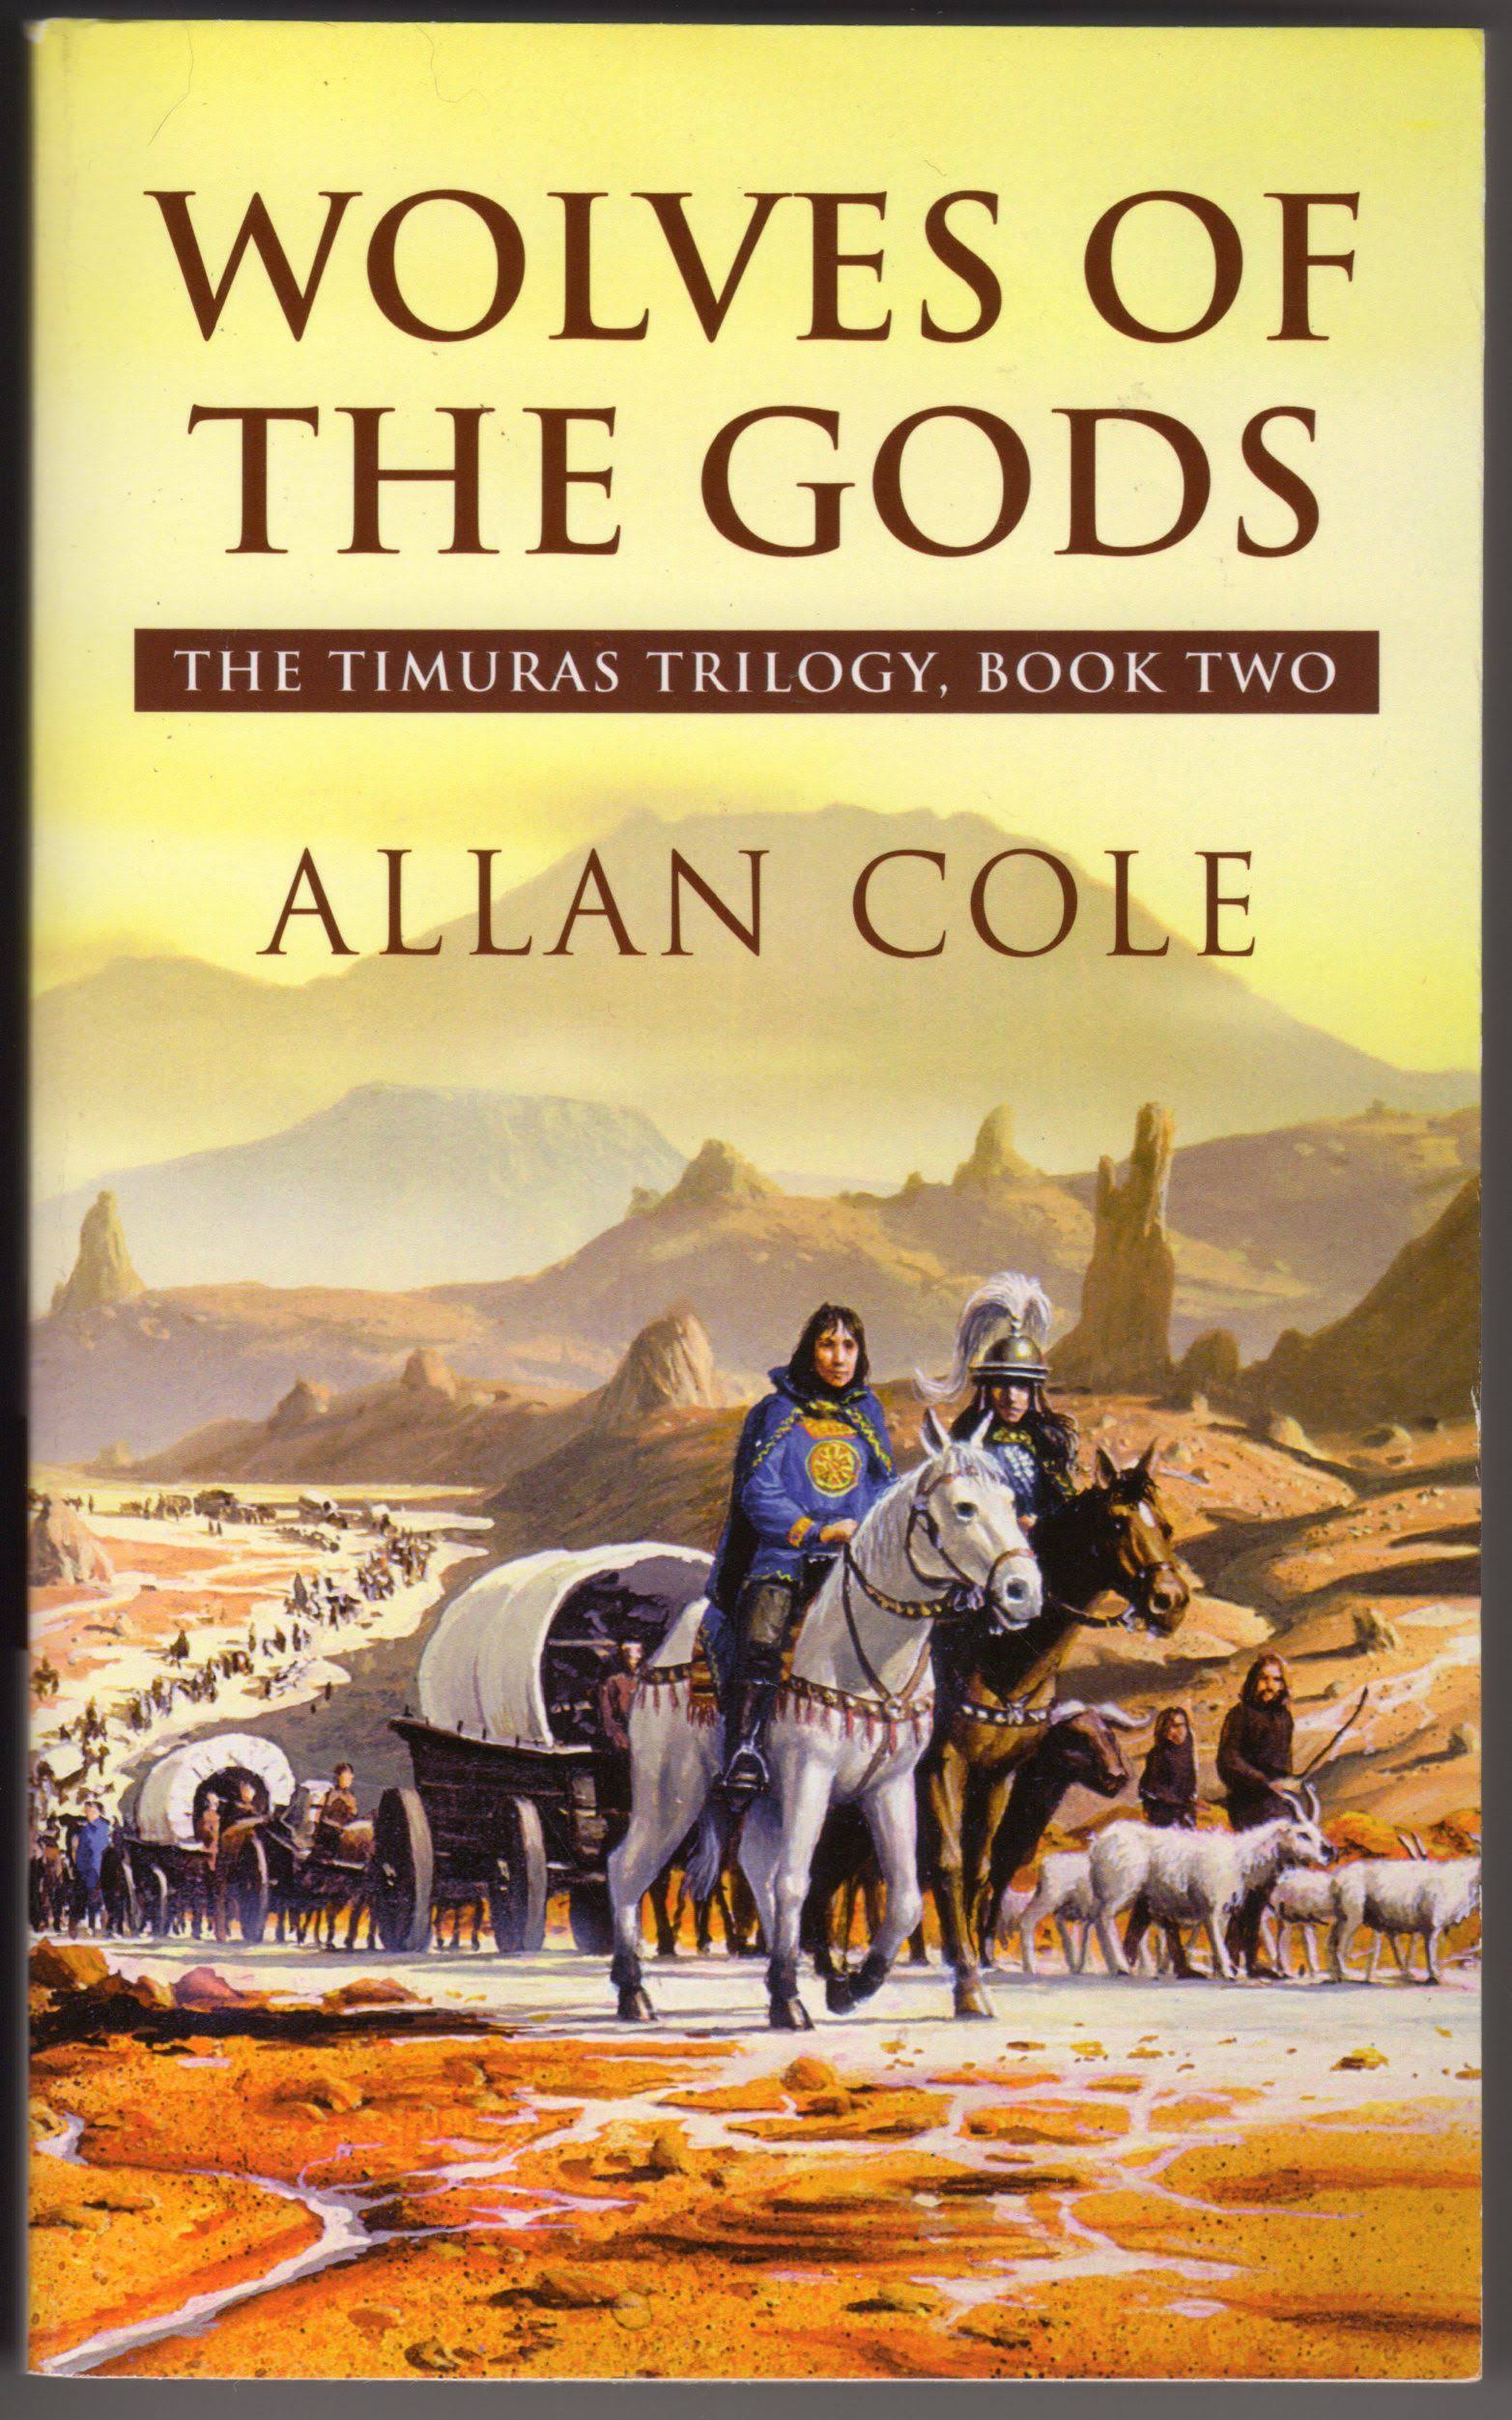 Wolves of the Gods [Book]